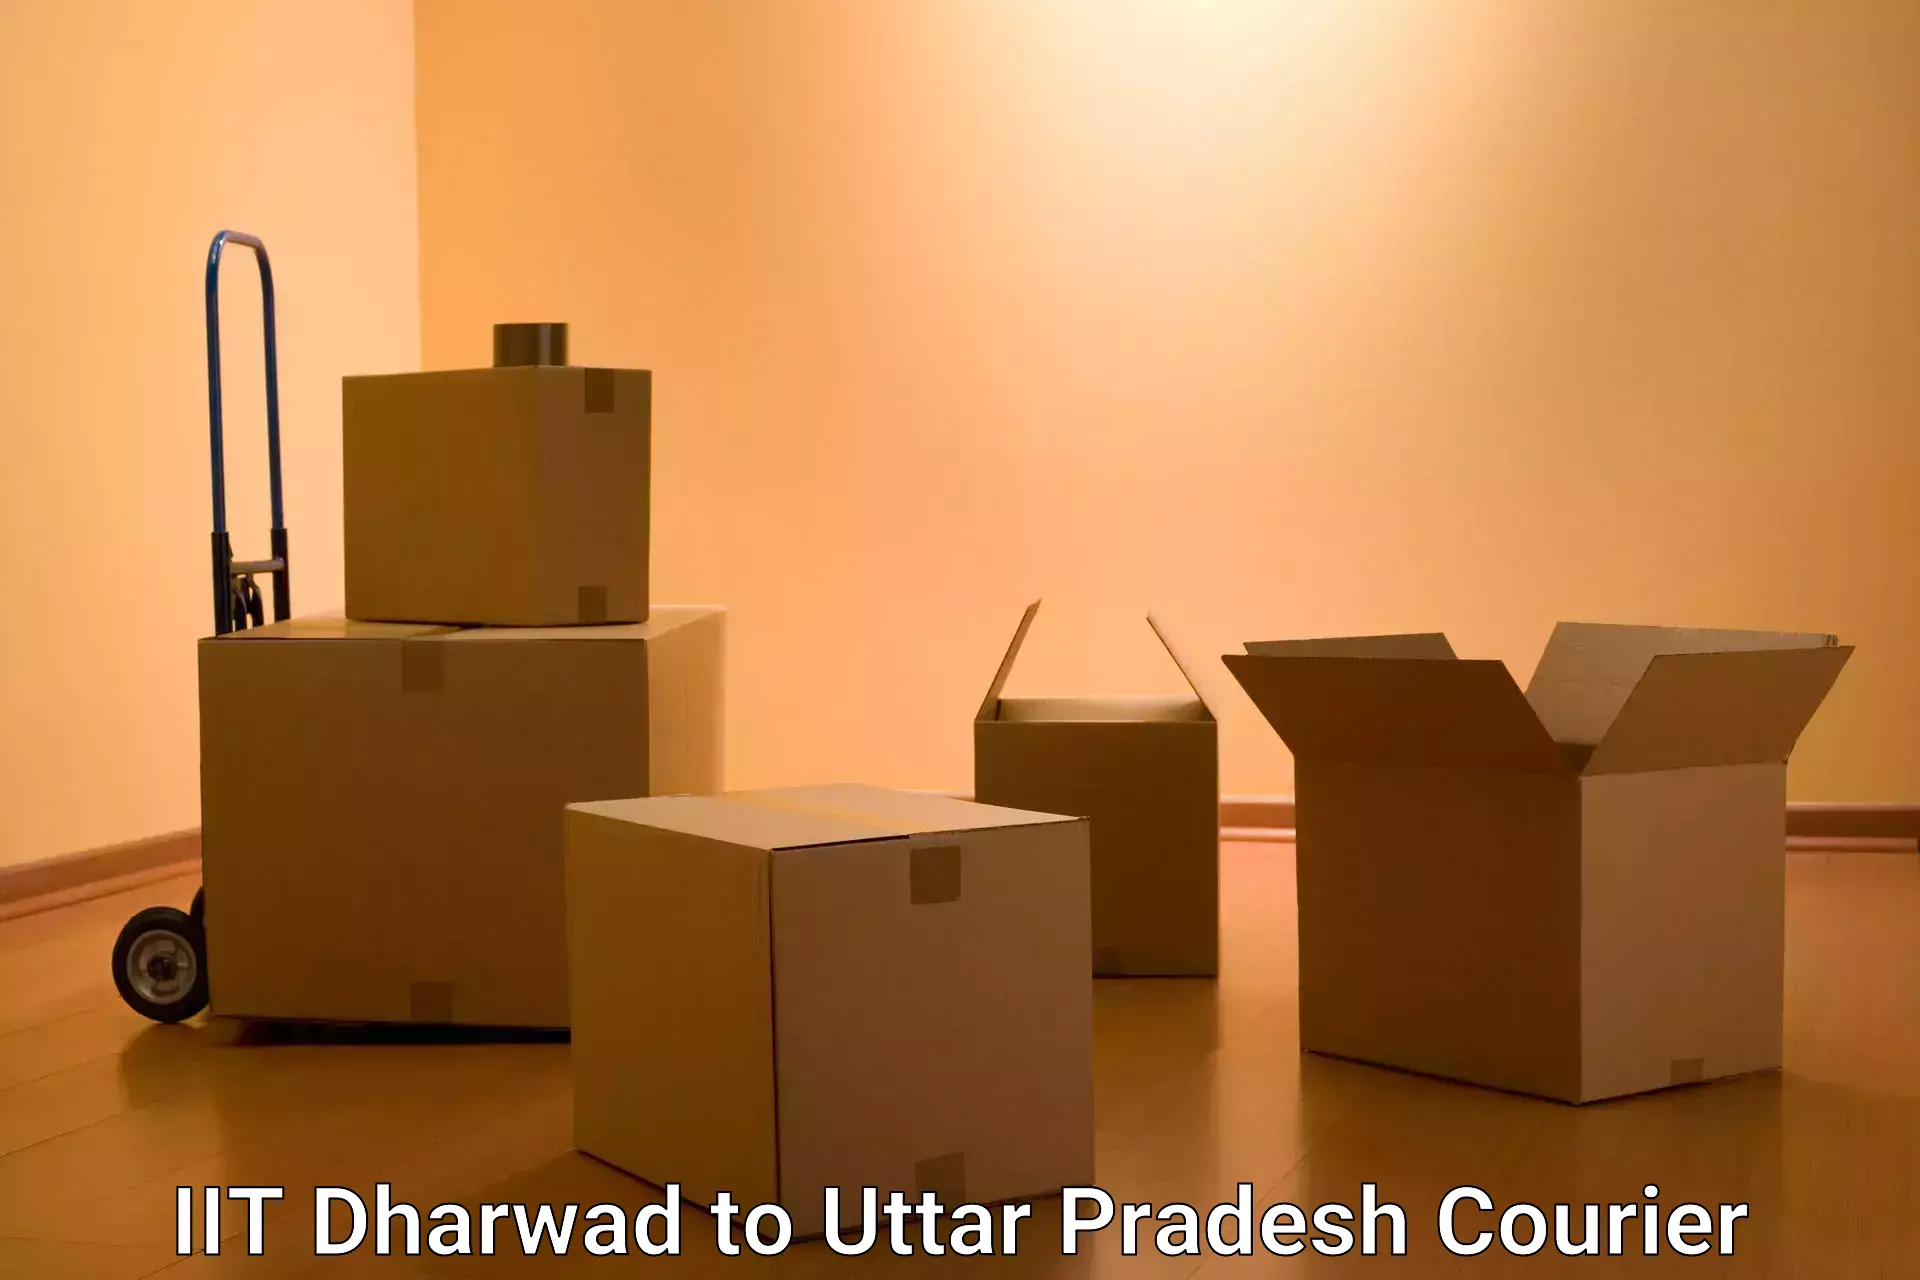 Customized delivery options IIT Dharwad to Agra